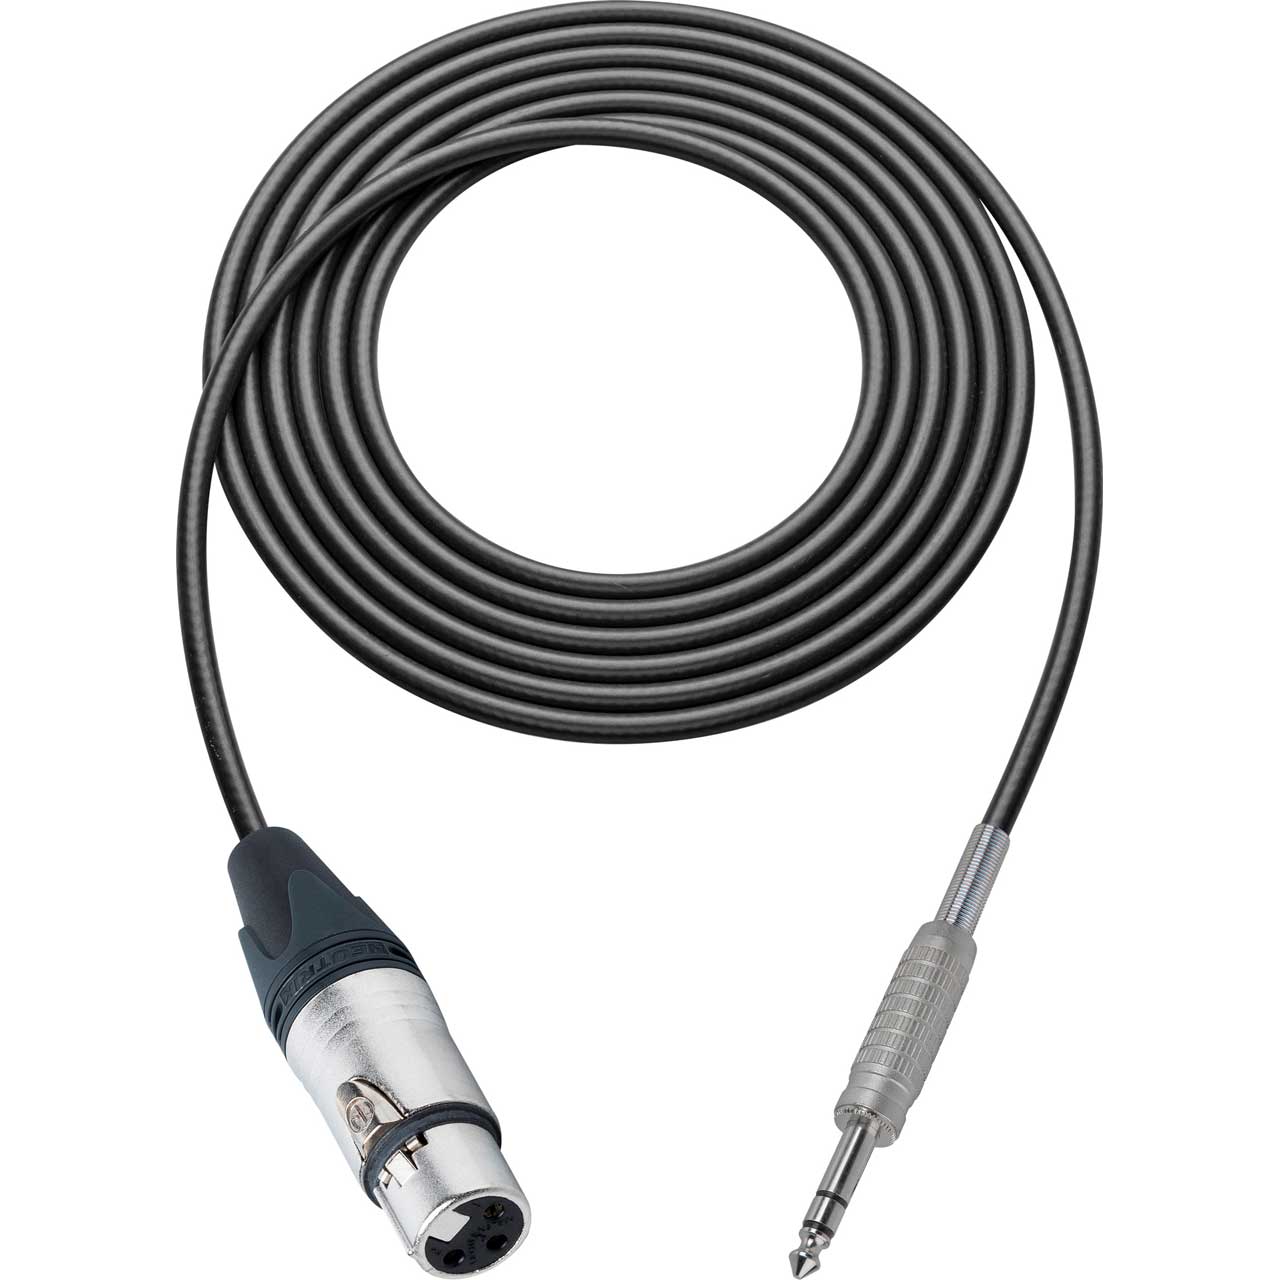 Sescom SC100XJSZ Audio Cable Canare Star-Quad 3-Pin XLR Female to 1/4 TRS Balanced Male Black - 100 Foot